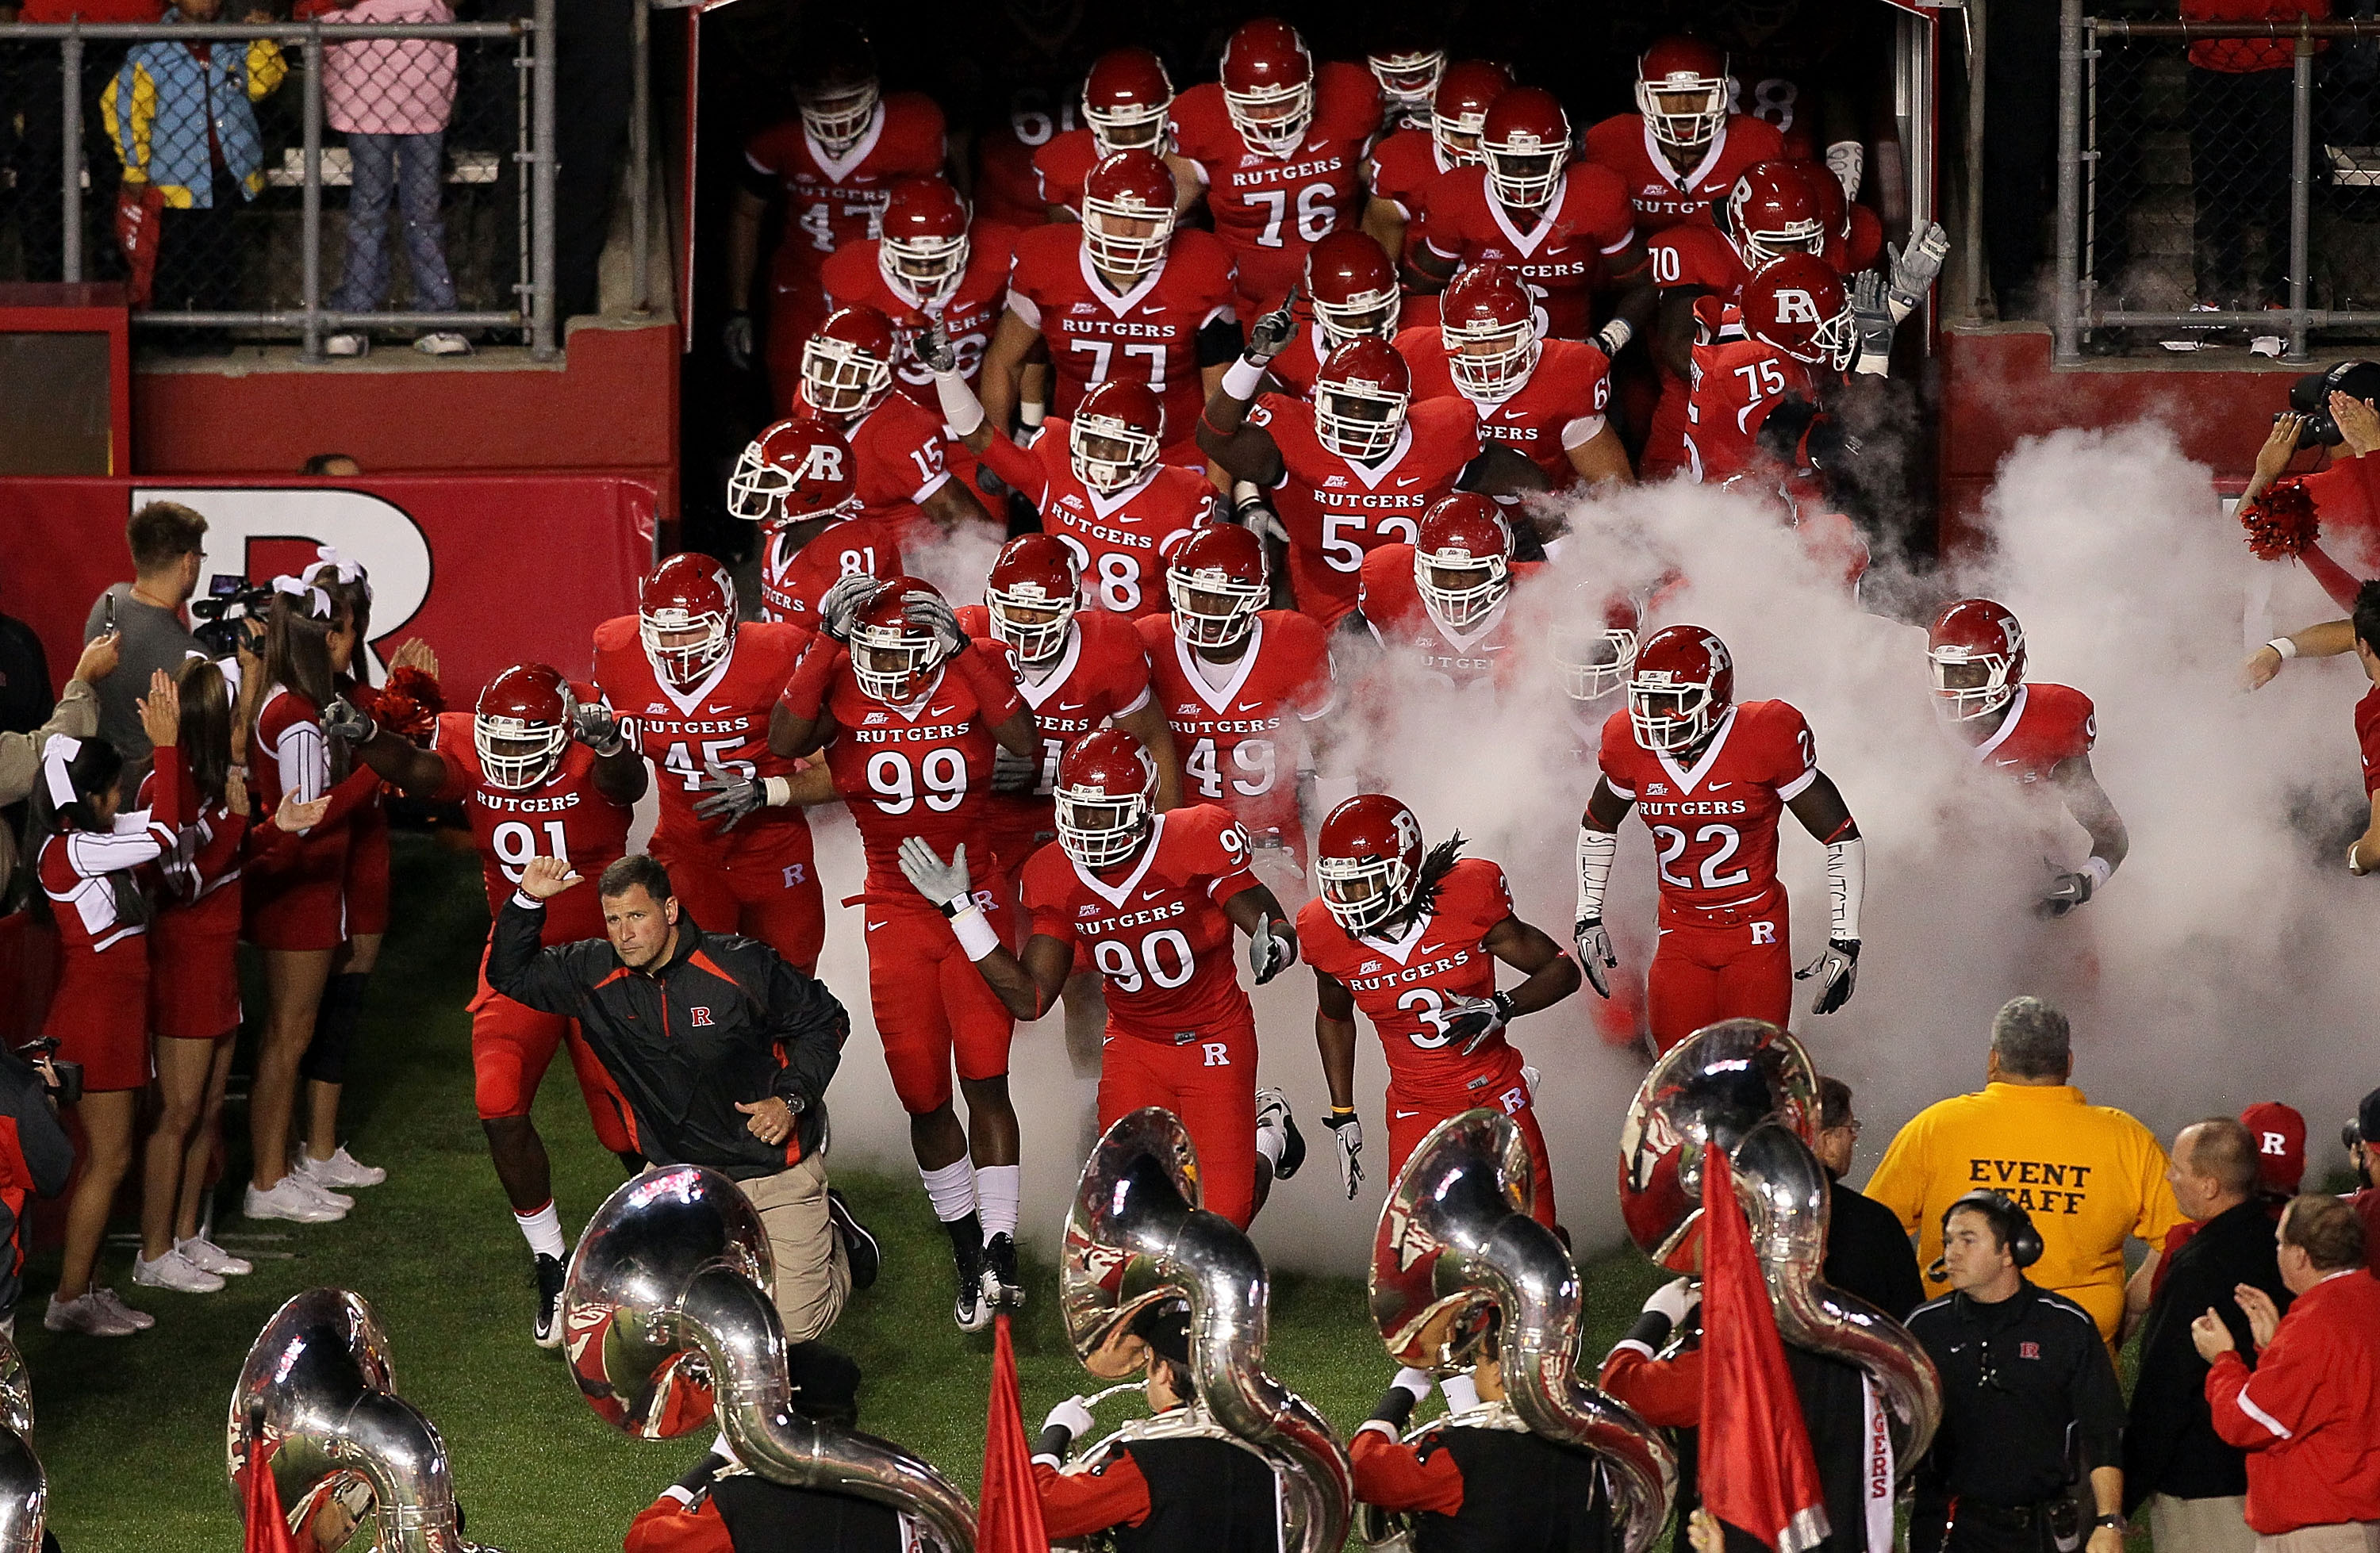 PISCATAWAY, NJ - OCTOBER 08:  Head coach Greg Schiano of the Rutgers Scarlet Knights leads his team onto the field to play against the Connecticut Huskies at Rutgers Stadium on October 8, 2010 in Piscataway, New Jersey.  (Photo by Jim McIsaac/Getty Images